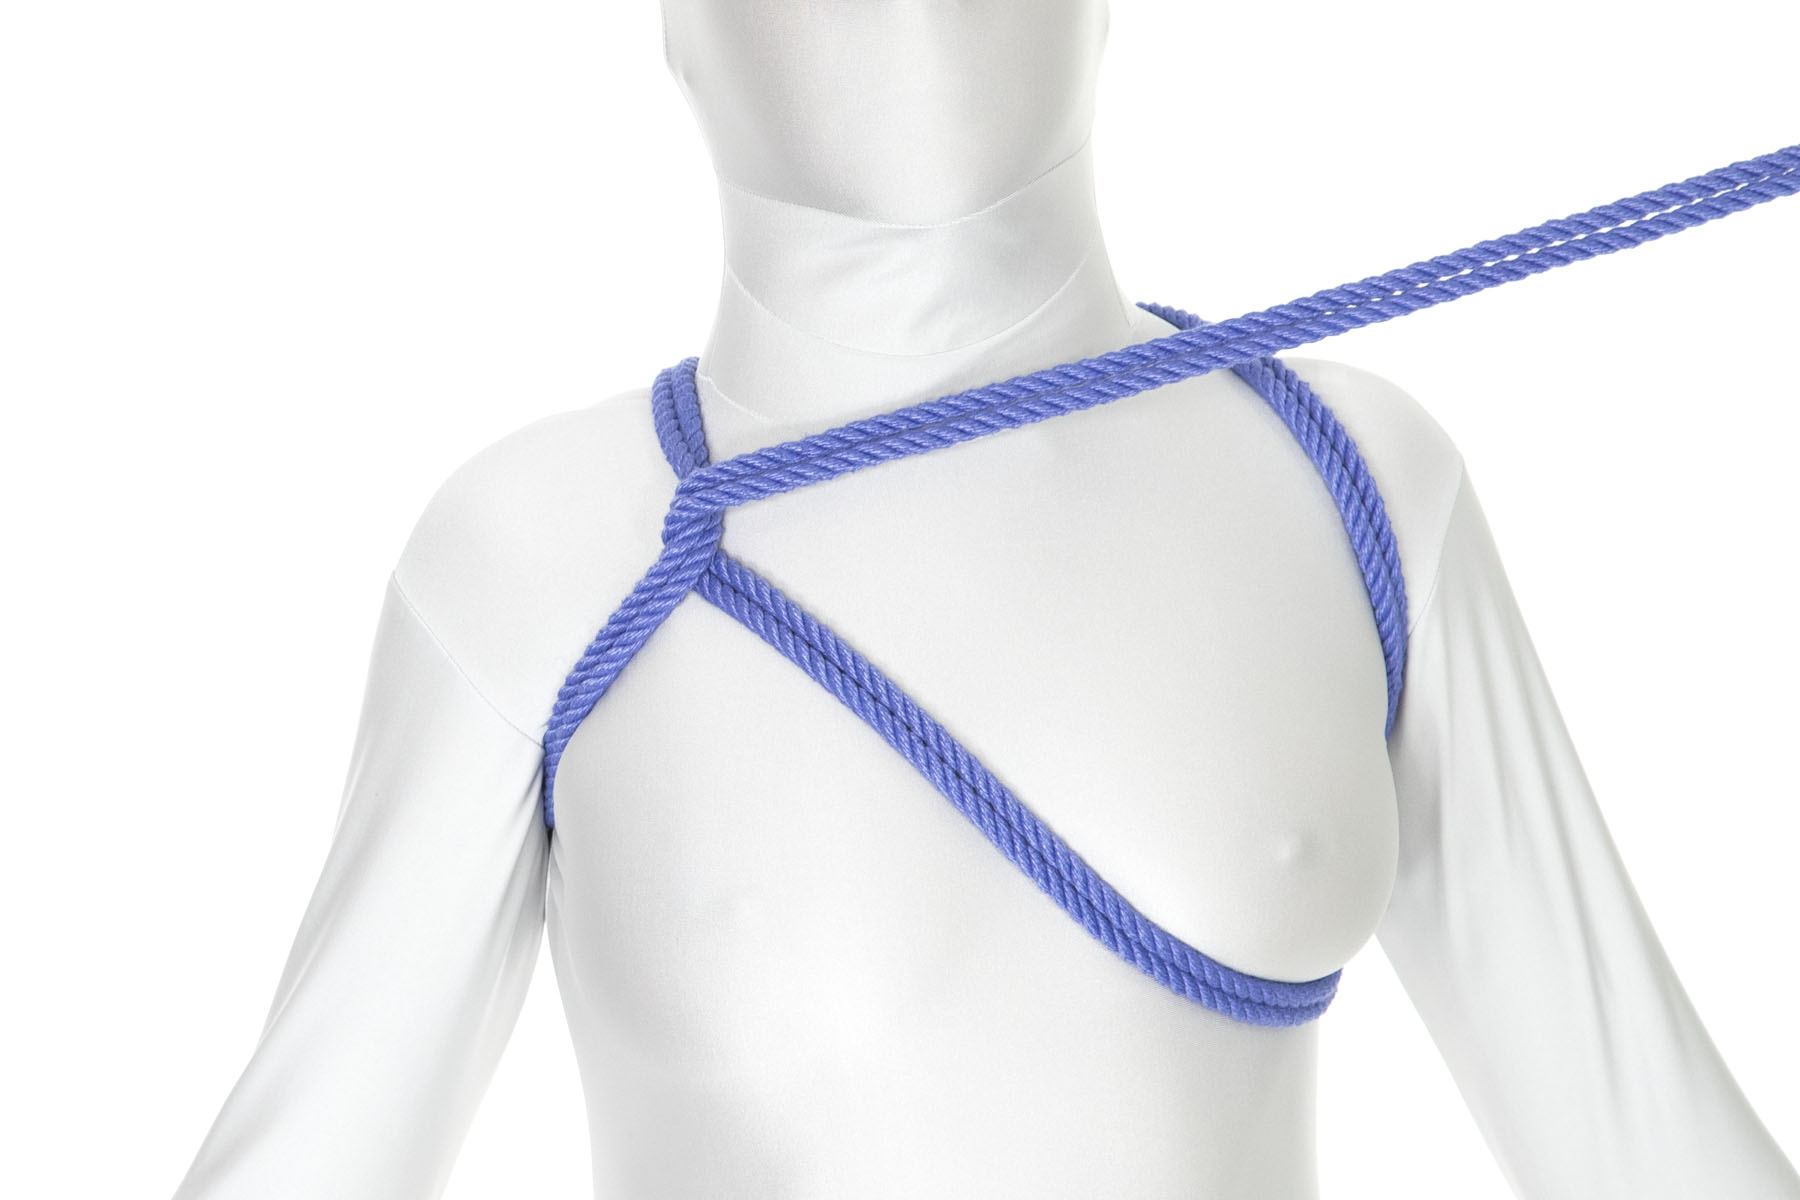 A person with breasts in a white bodysuit. They have a blue shoulder line on each side. A new rope comes under the left shoulder and tucks directly under the left breast before going up to the right shoulder line and doubling back around it.